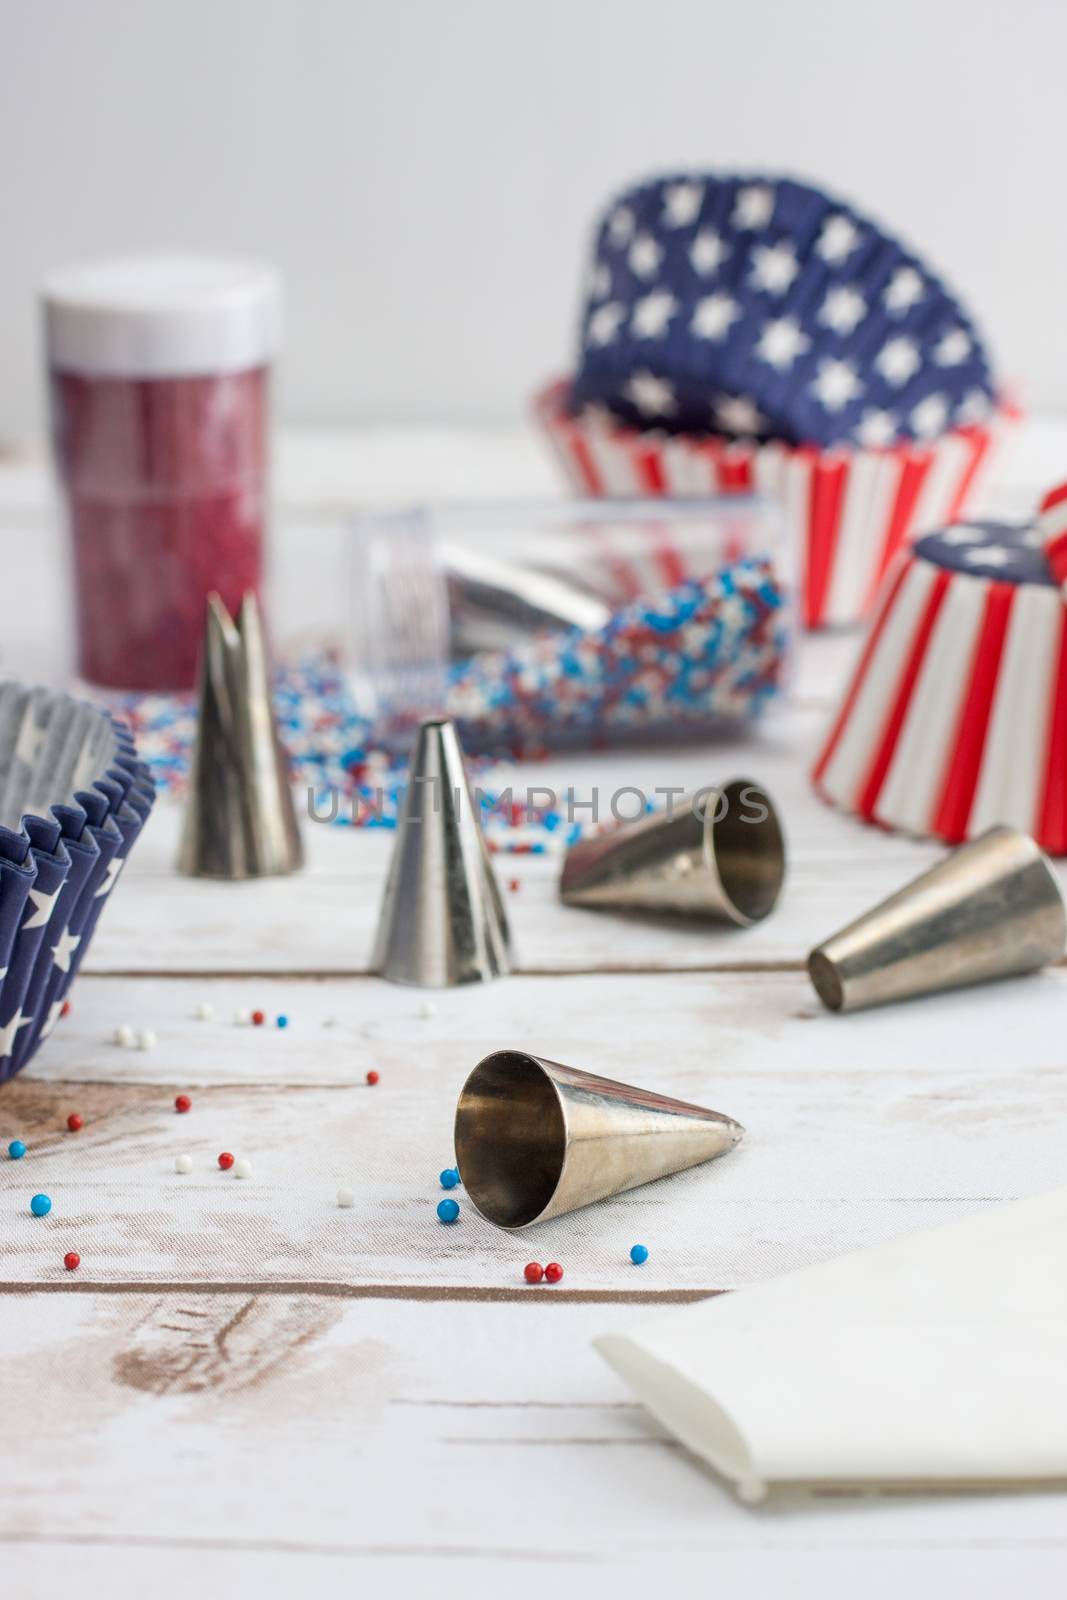 Table filled with baking and decorating tools in preperation for 4th of July baking.